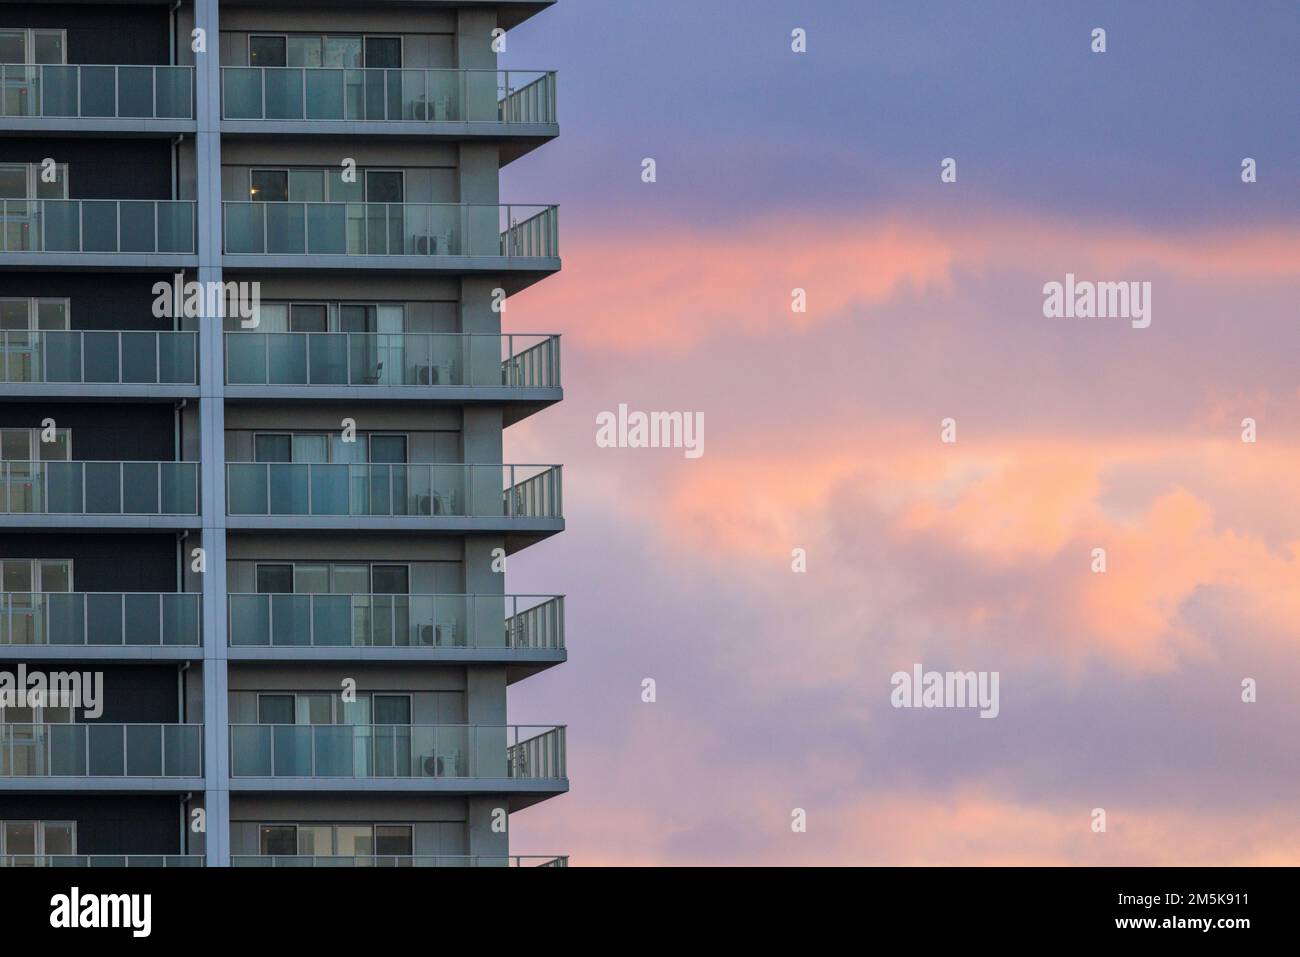 Exterior balconies on luxury apartment tower with beautiful sunset sky Stock Photo